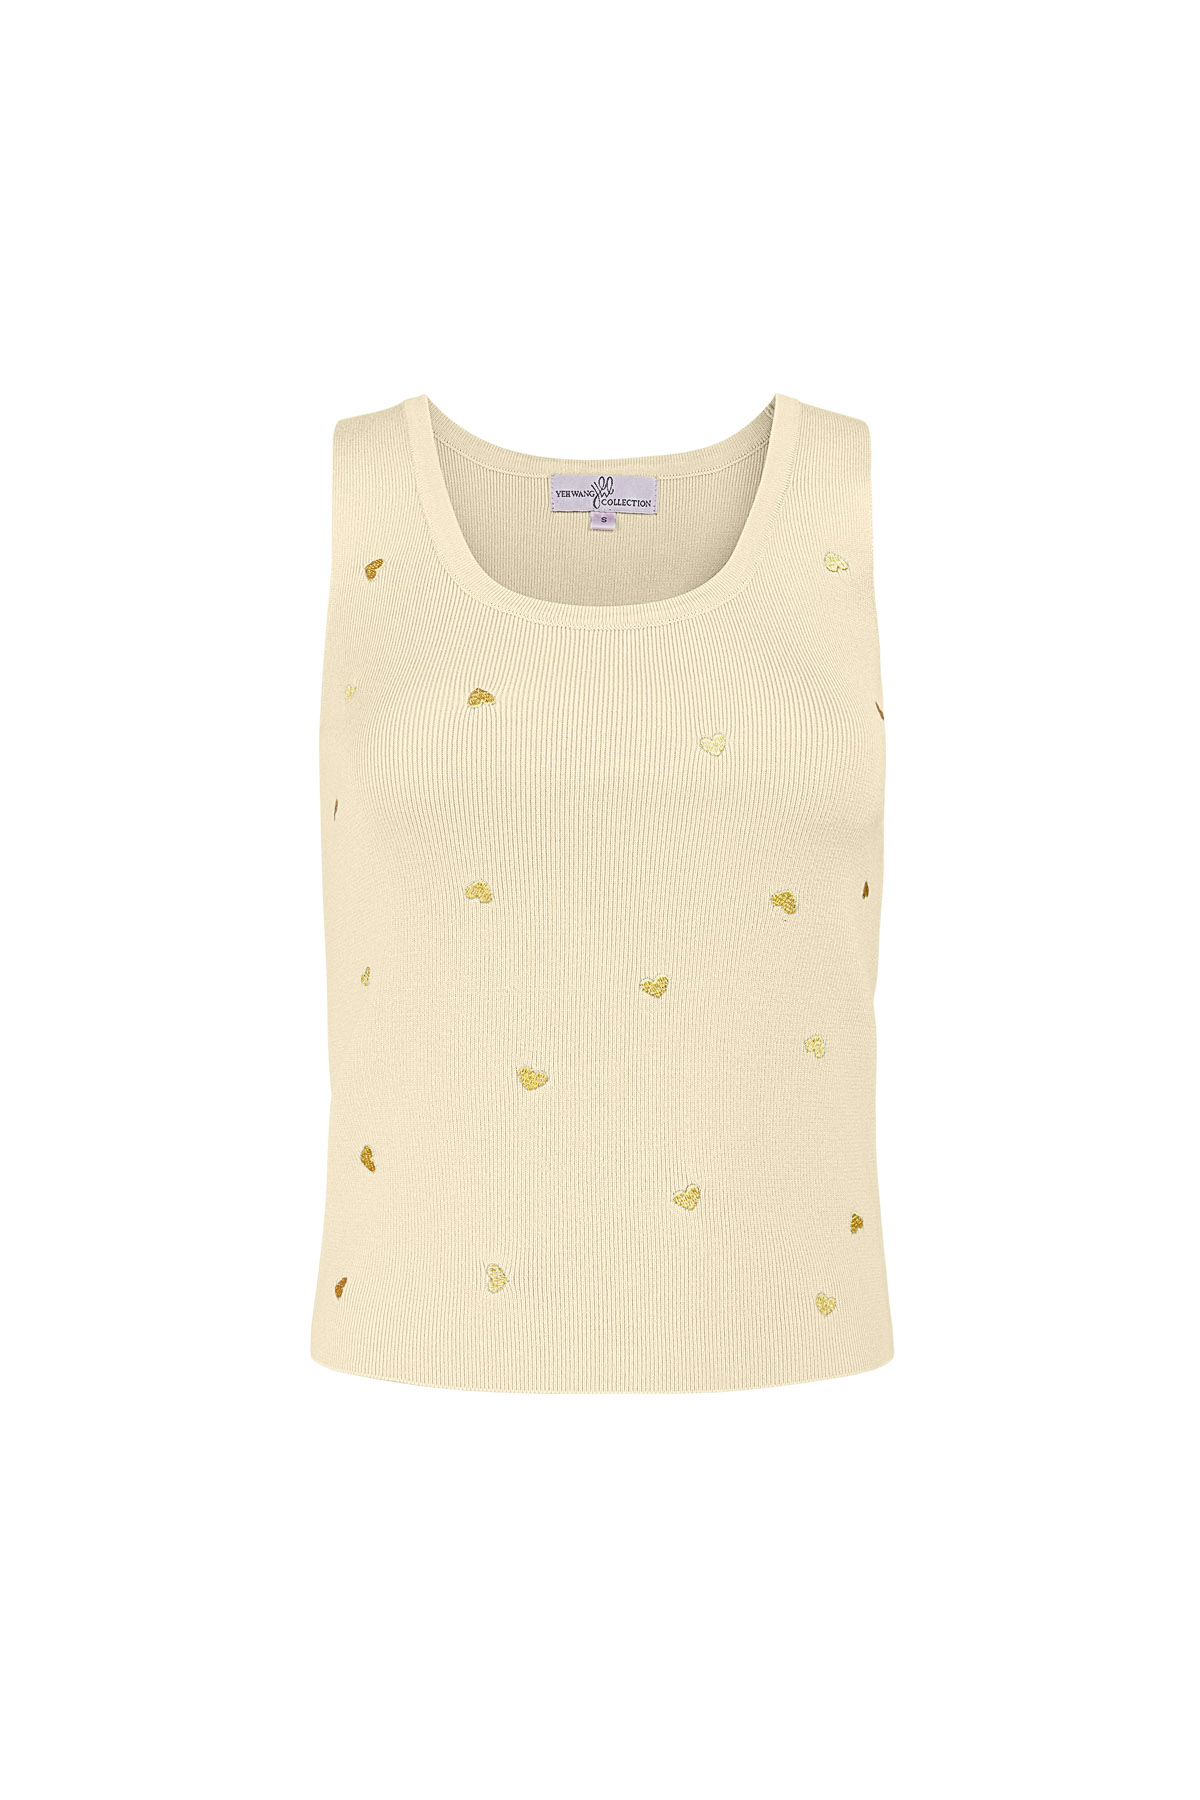 Sleeveless top with gold heart details small – beige 